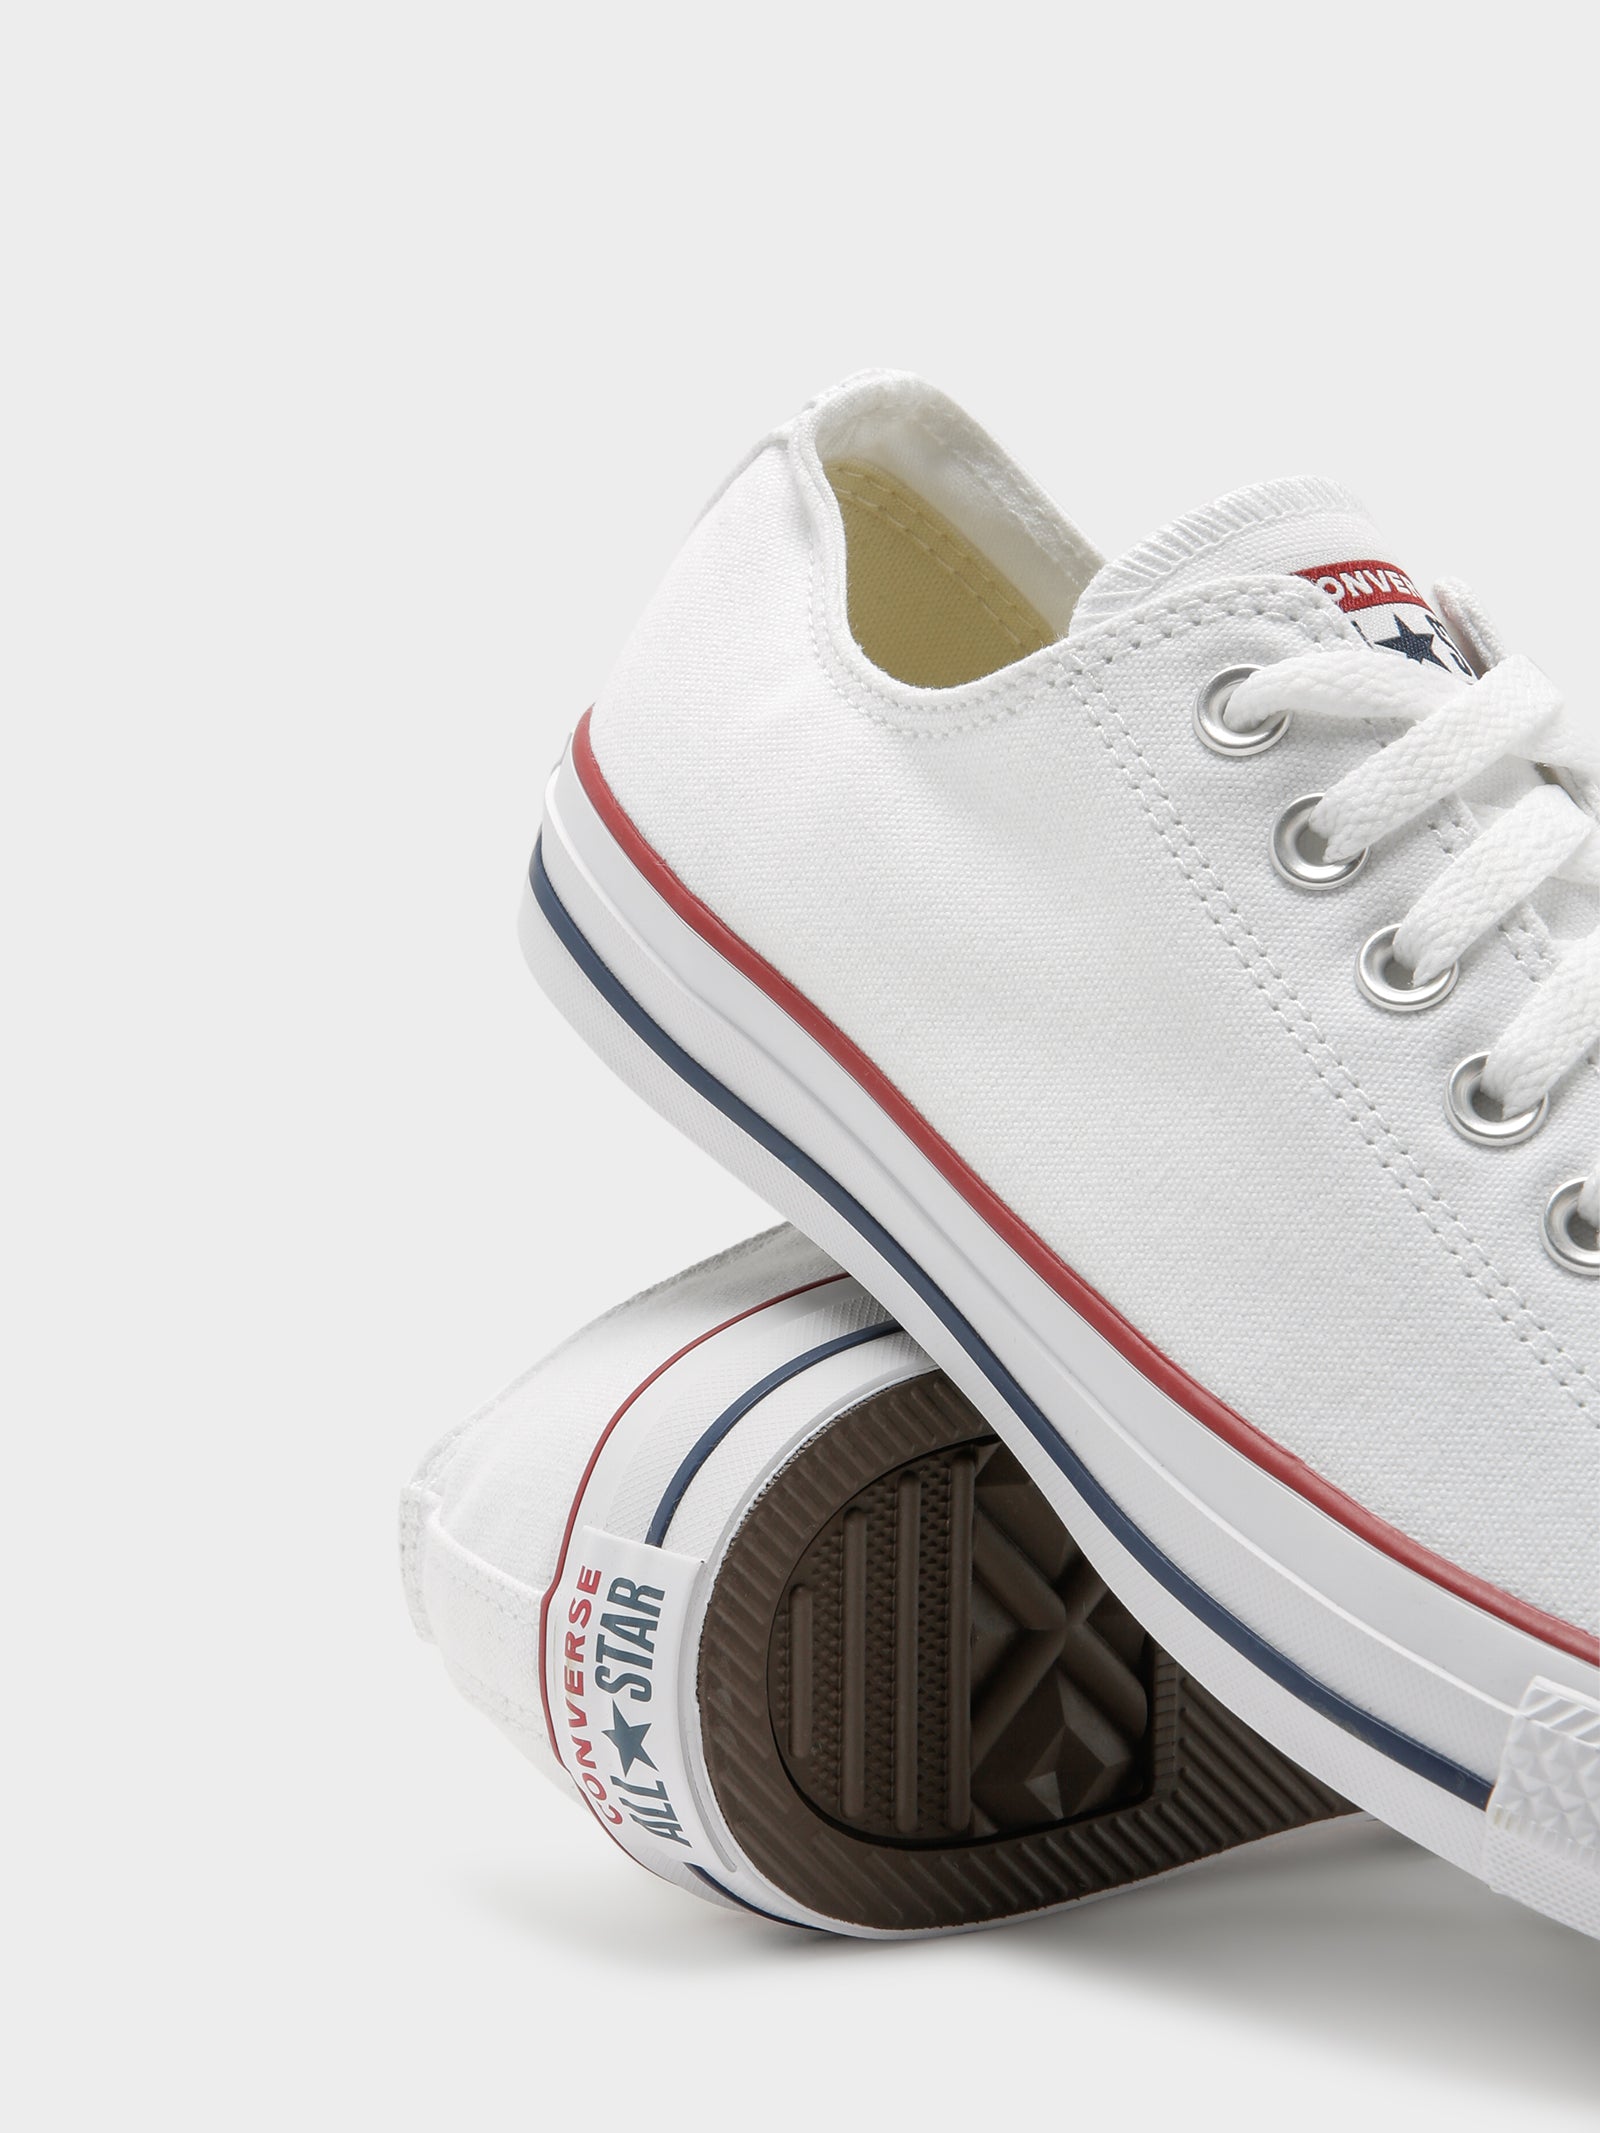 converse classic white low top